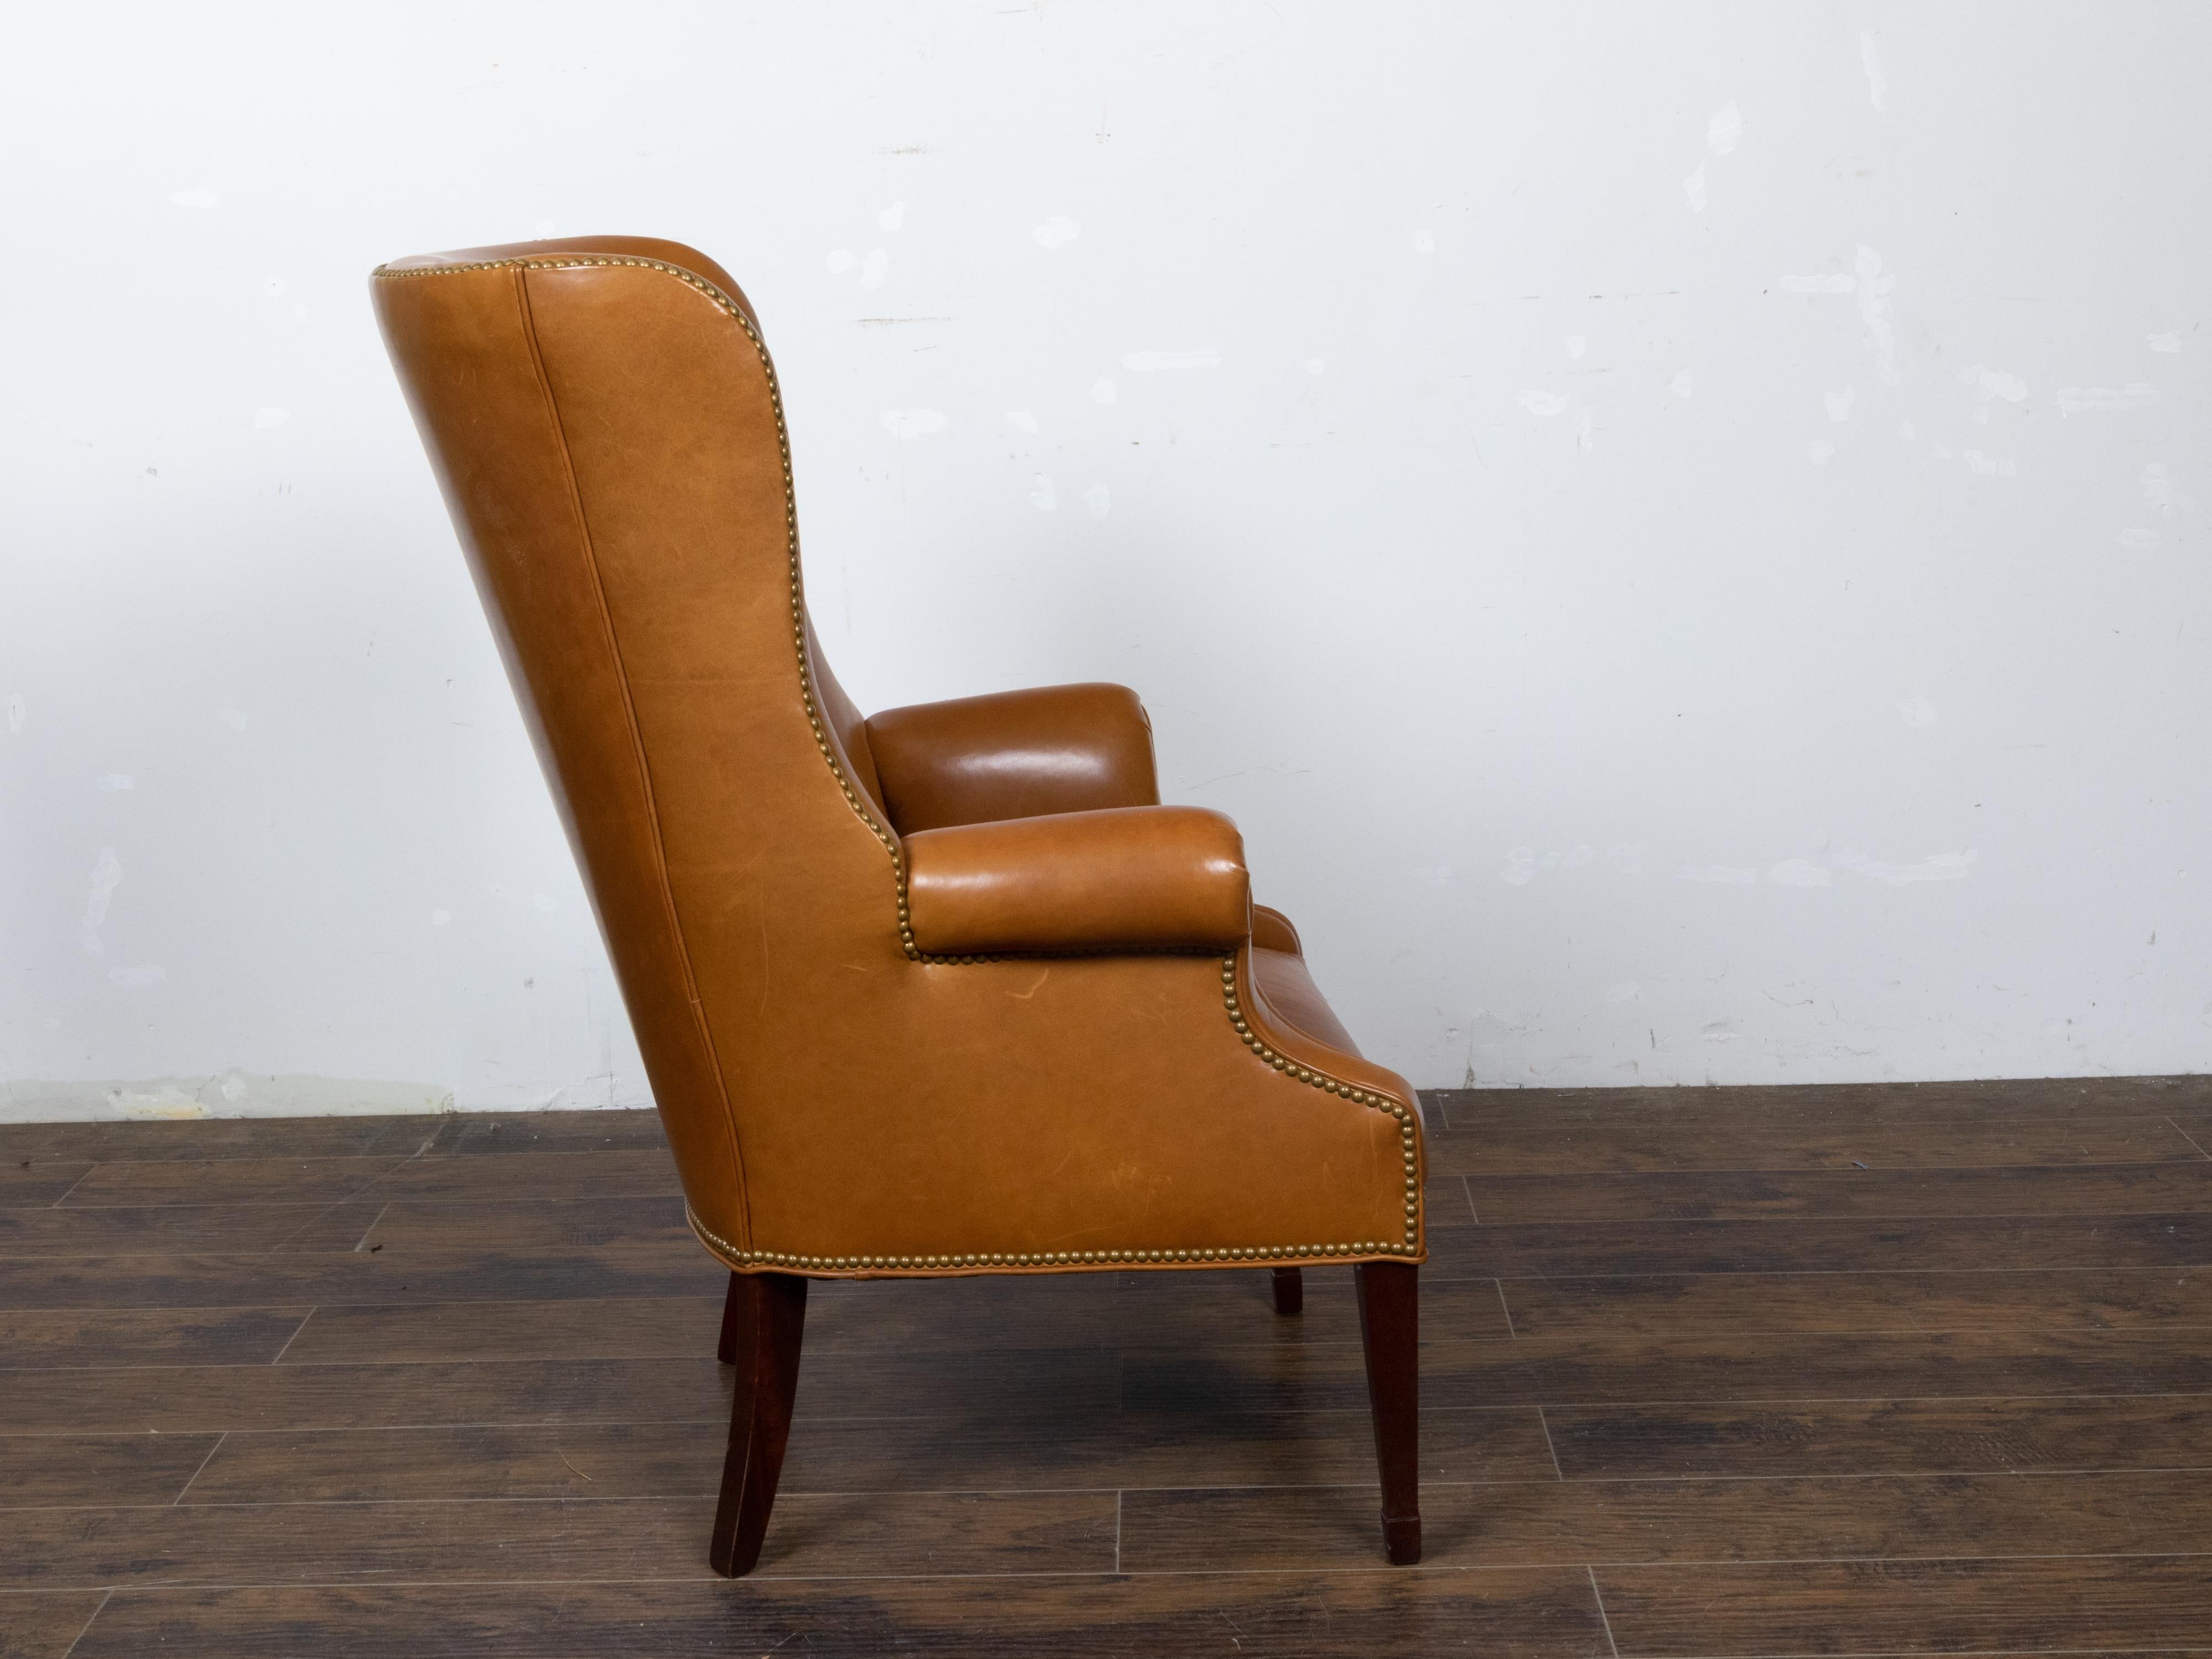 20th Century English Brown Leather Wingback Chair with Brass Nailhead Trim, circa 1930-1940 For Sale